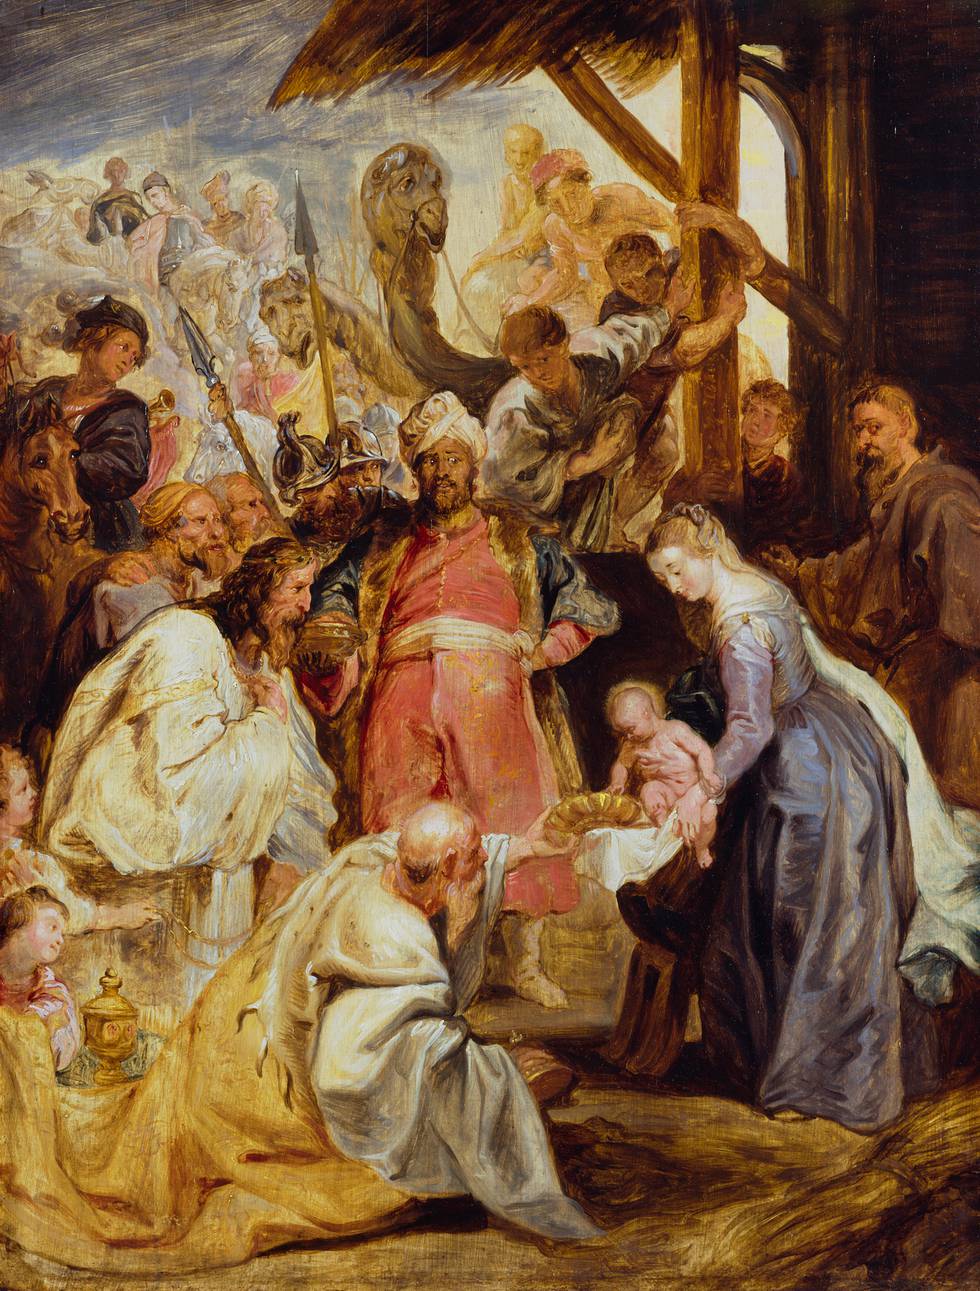 A painting of the Adoration of the Magi